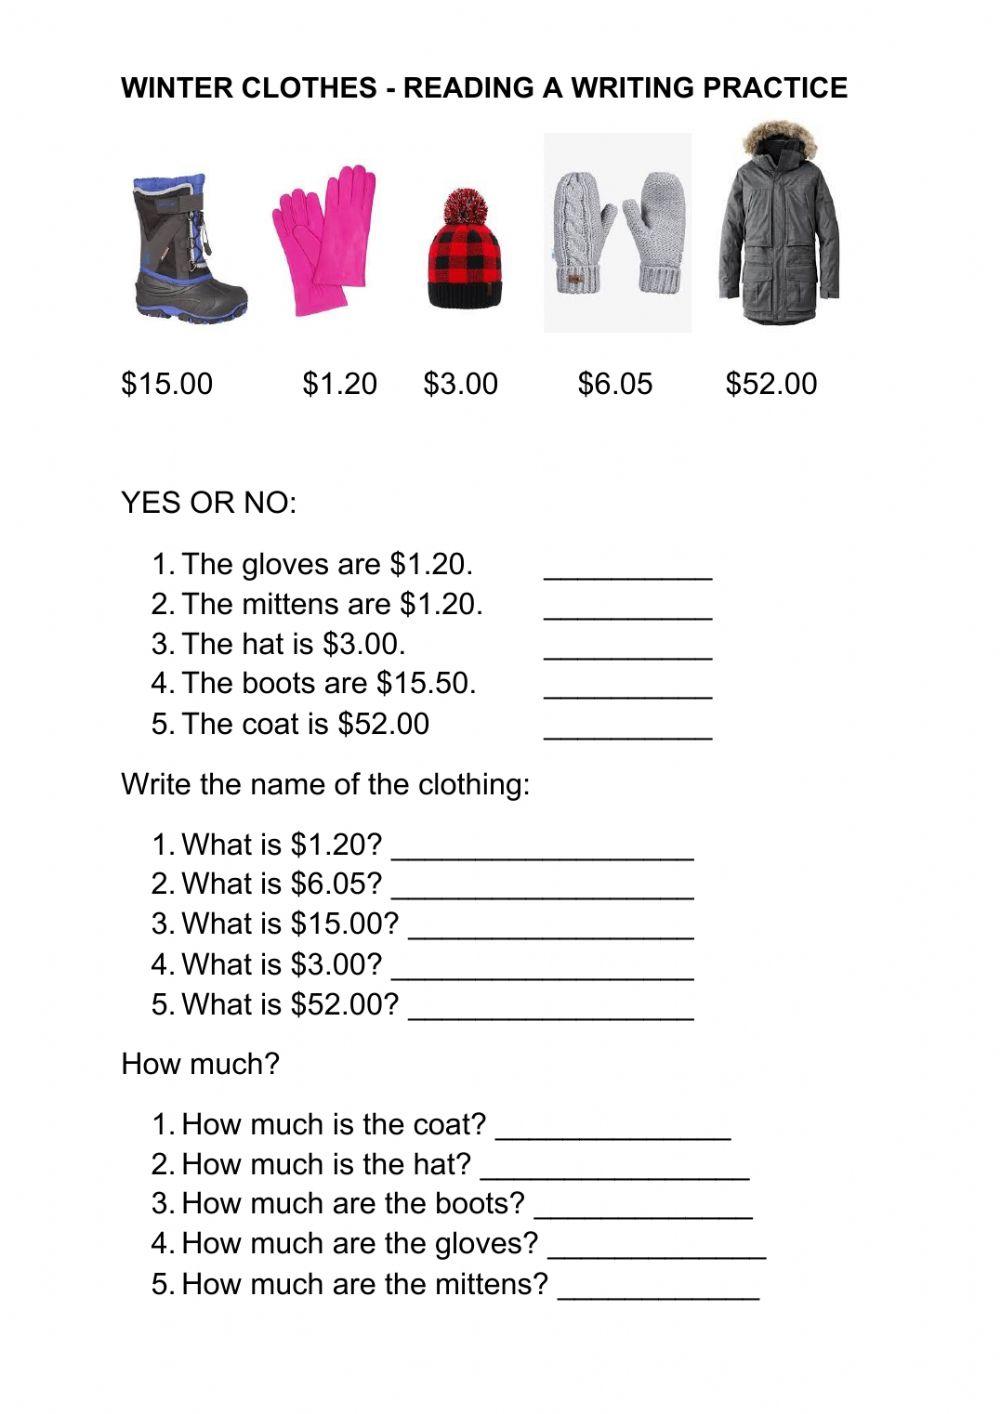 Winter clothes and prices